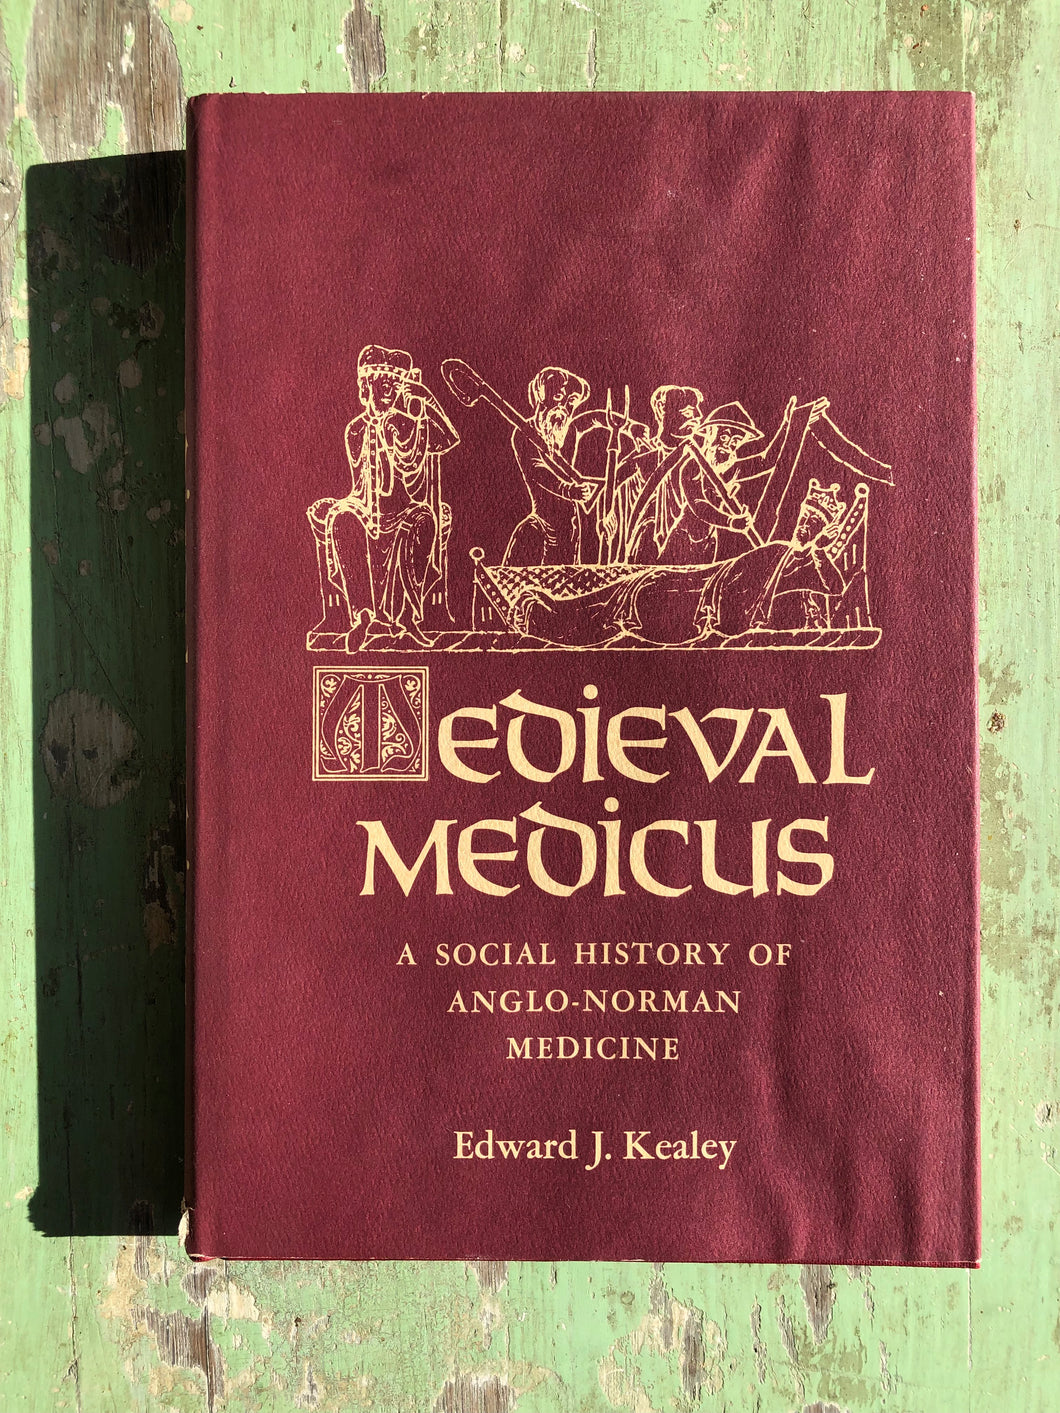 Medieval Medicus: A Social History of Anglo-Norman Medicine. by Edward J. Kealey